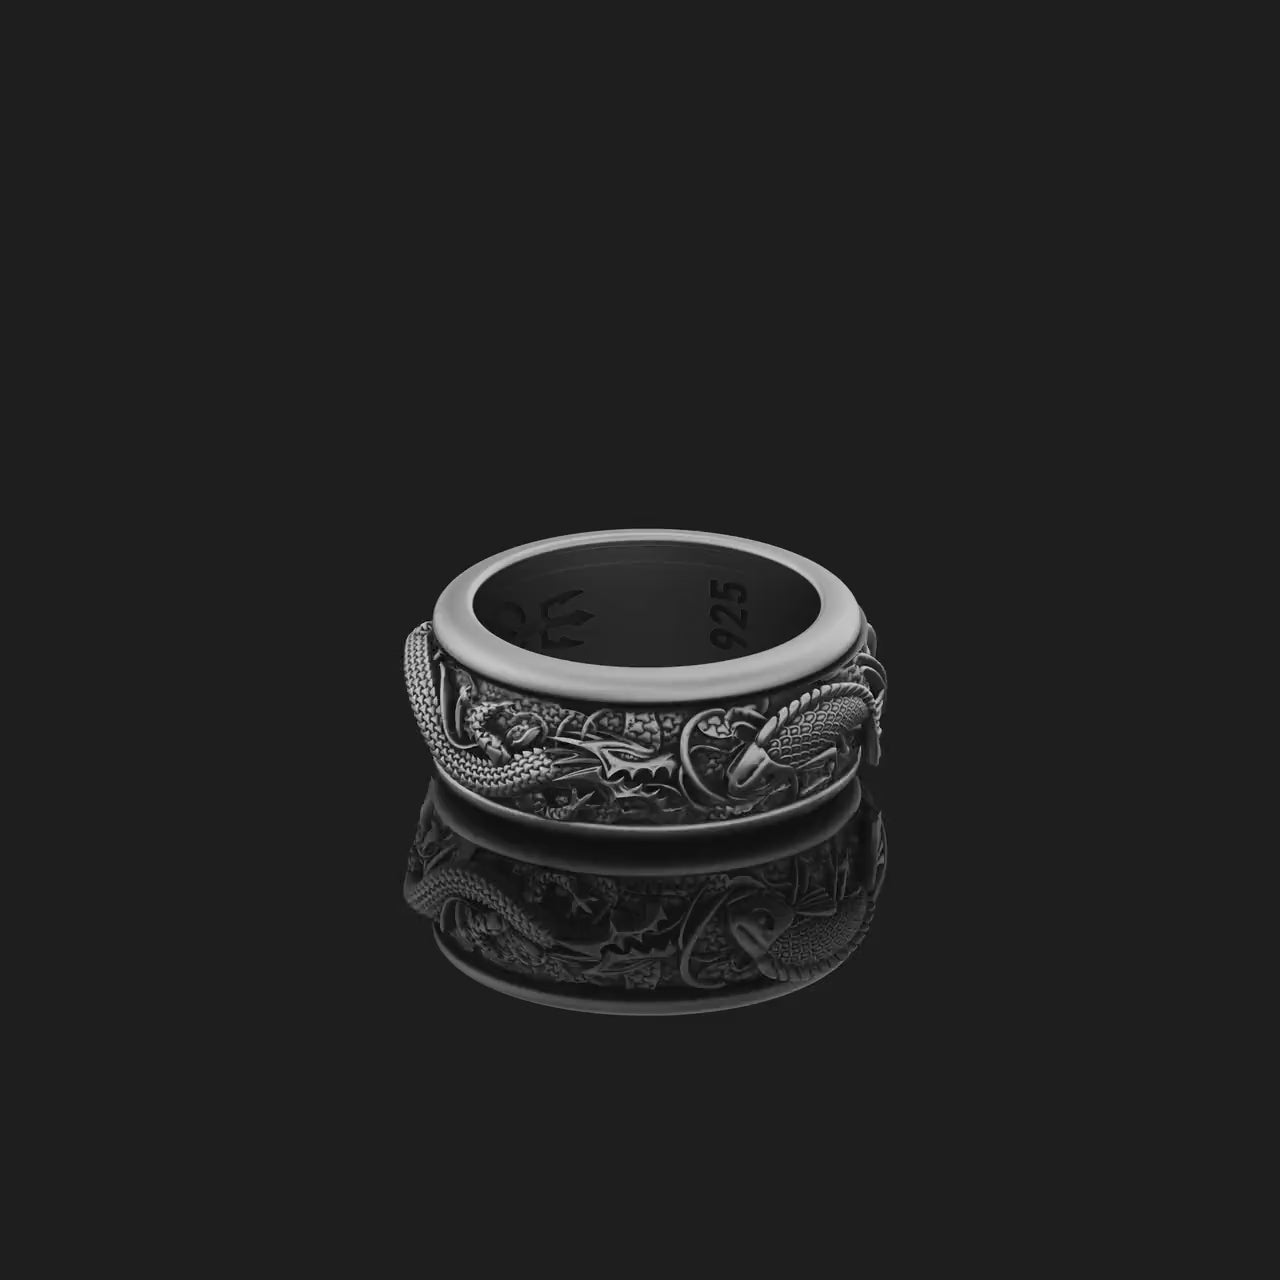 Rotating Dragon and Carp Fish Ring, Symbol of Power and Prosperity, Unique Wedding Engagement Band, Fusion of Myths